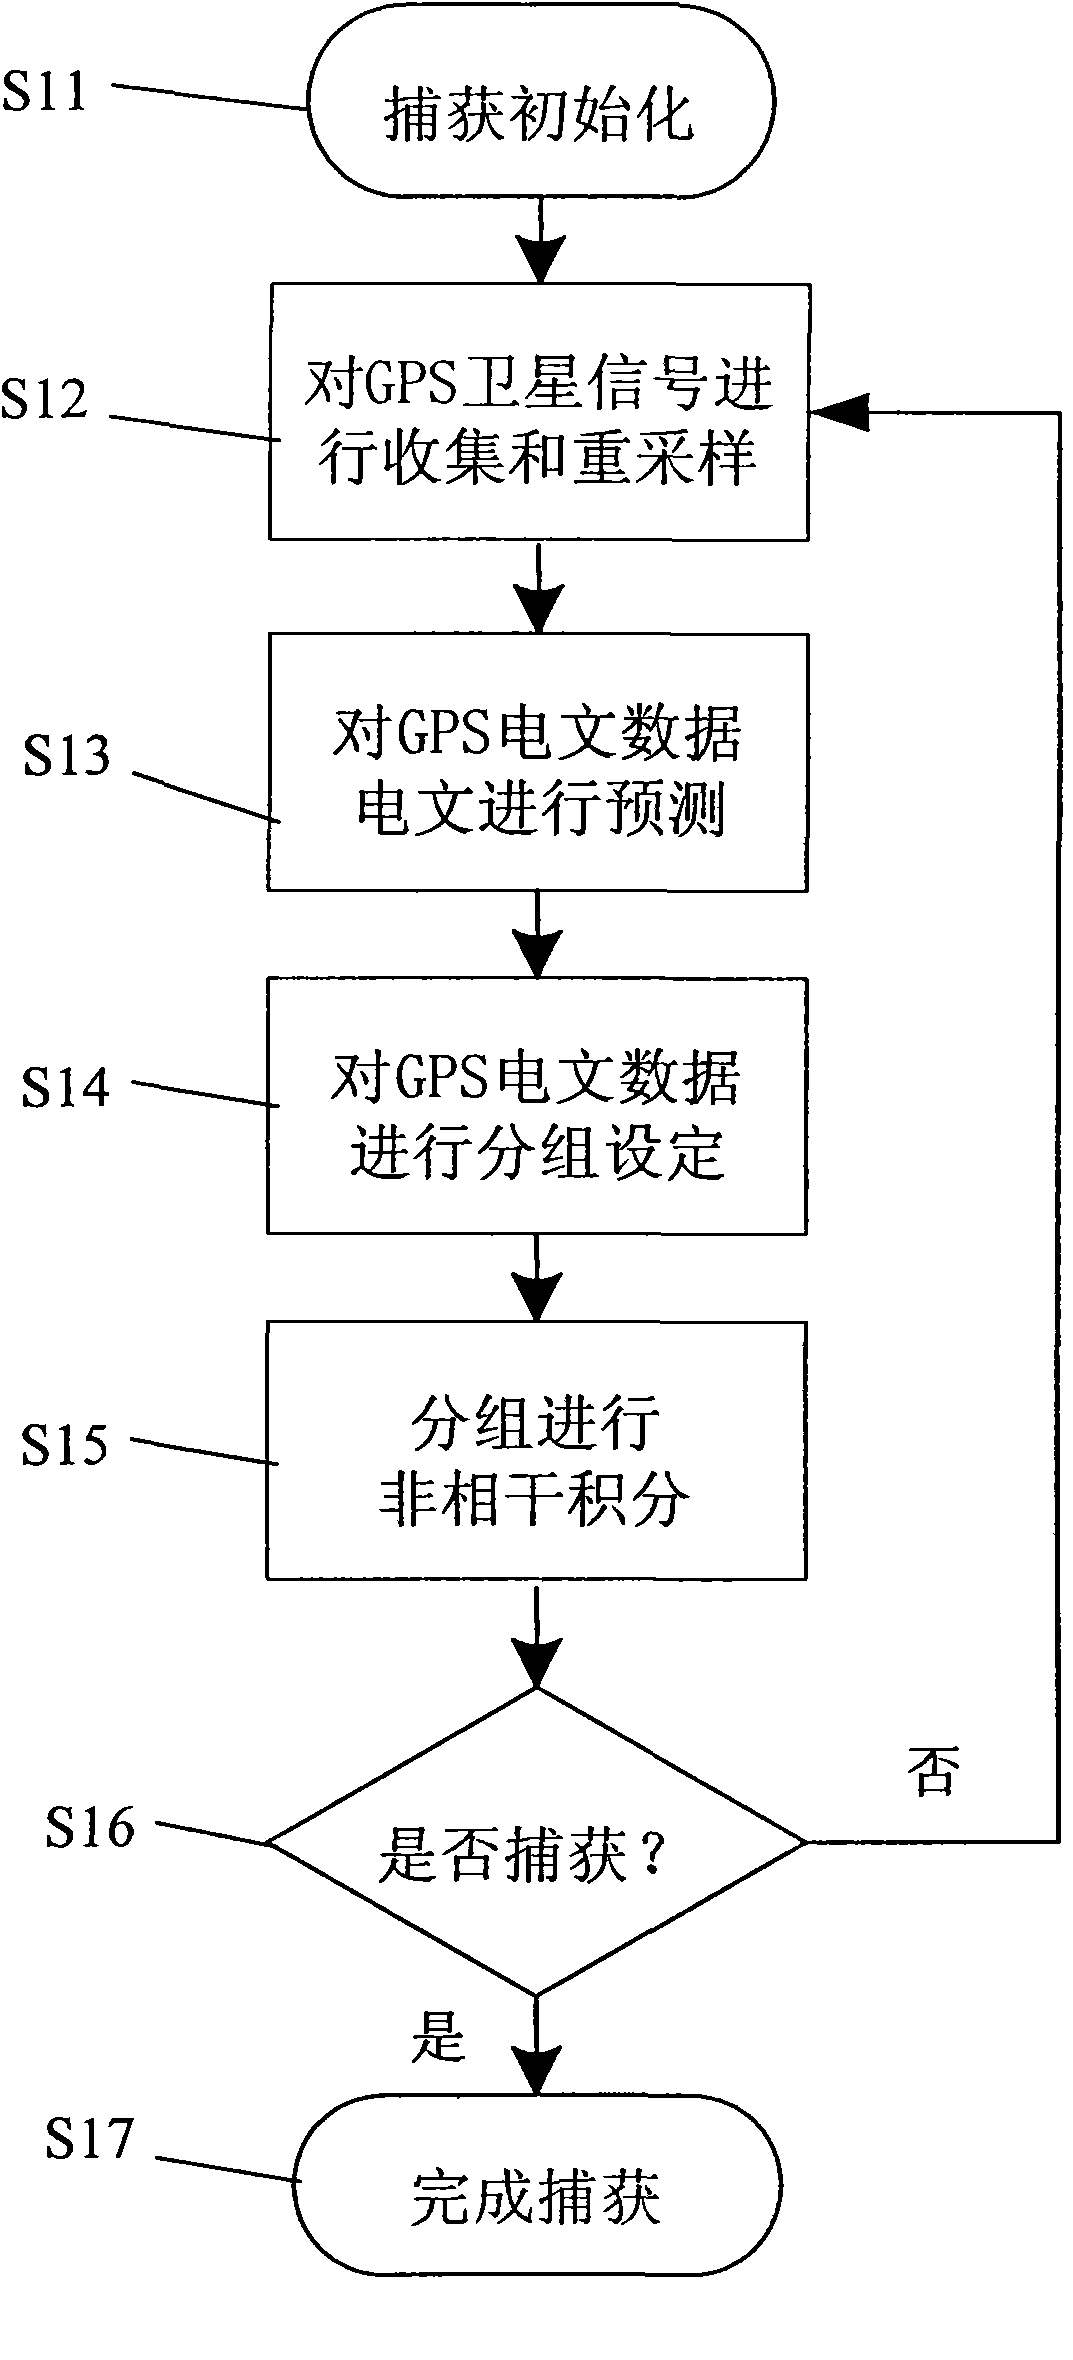 Method and device for capturing GPS satellite signals